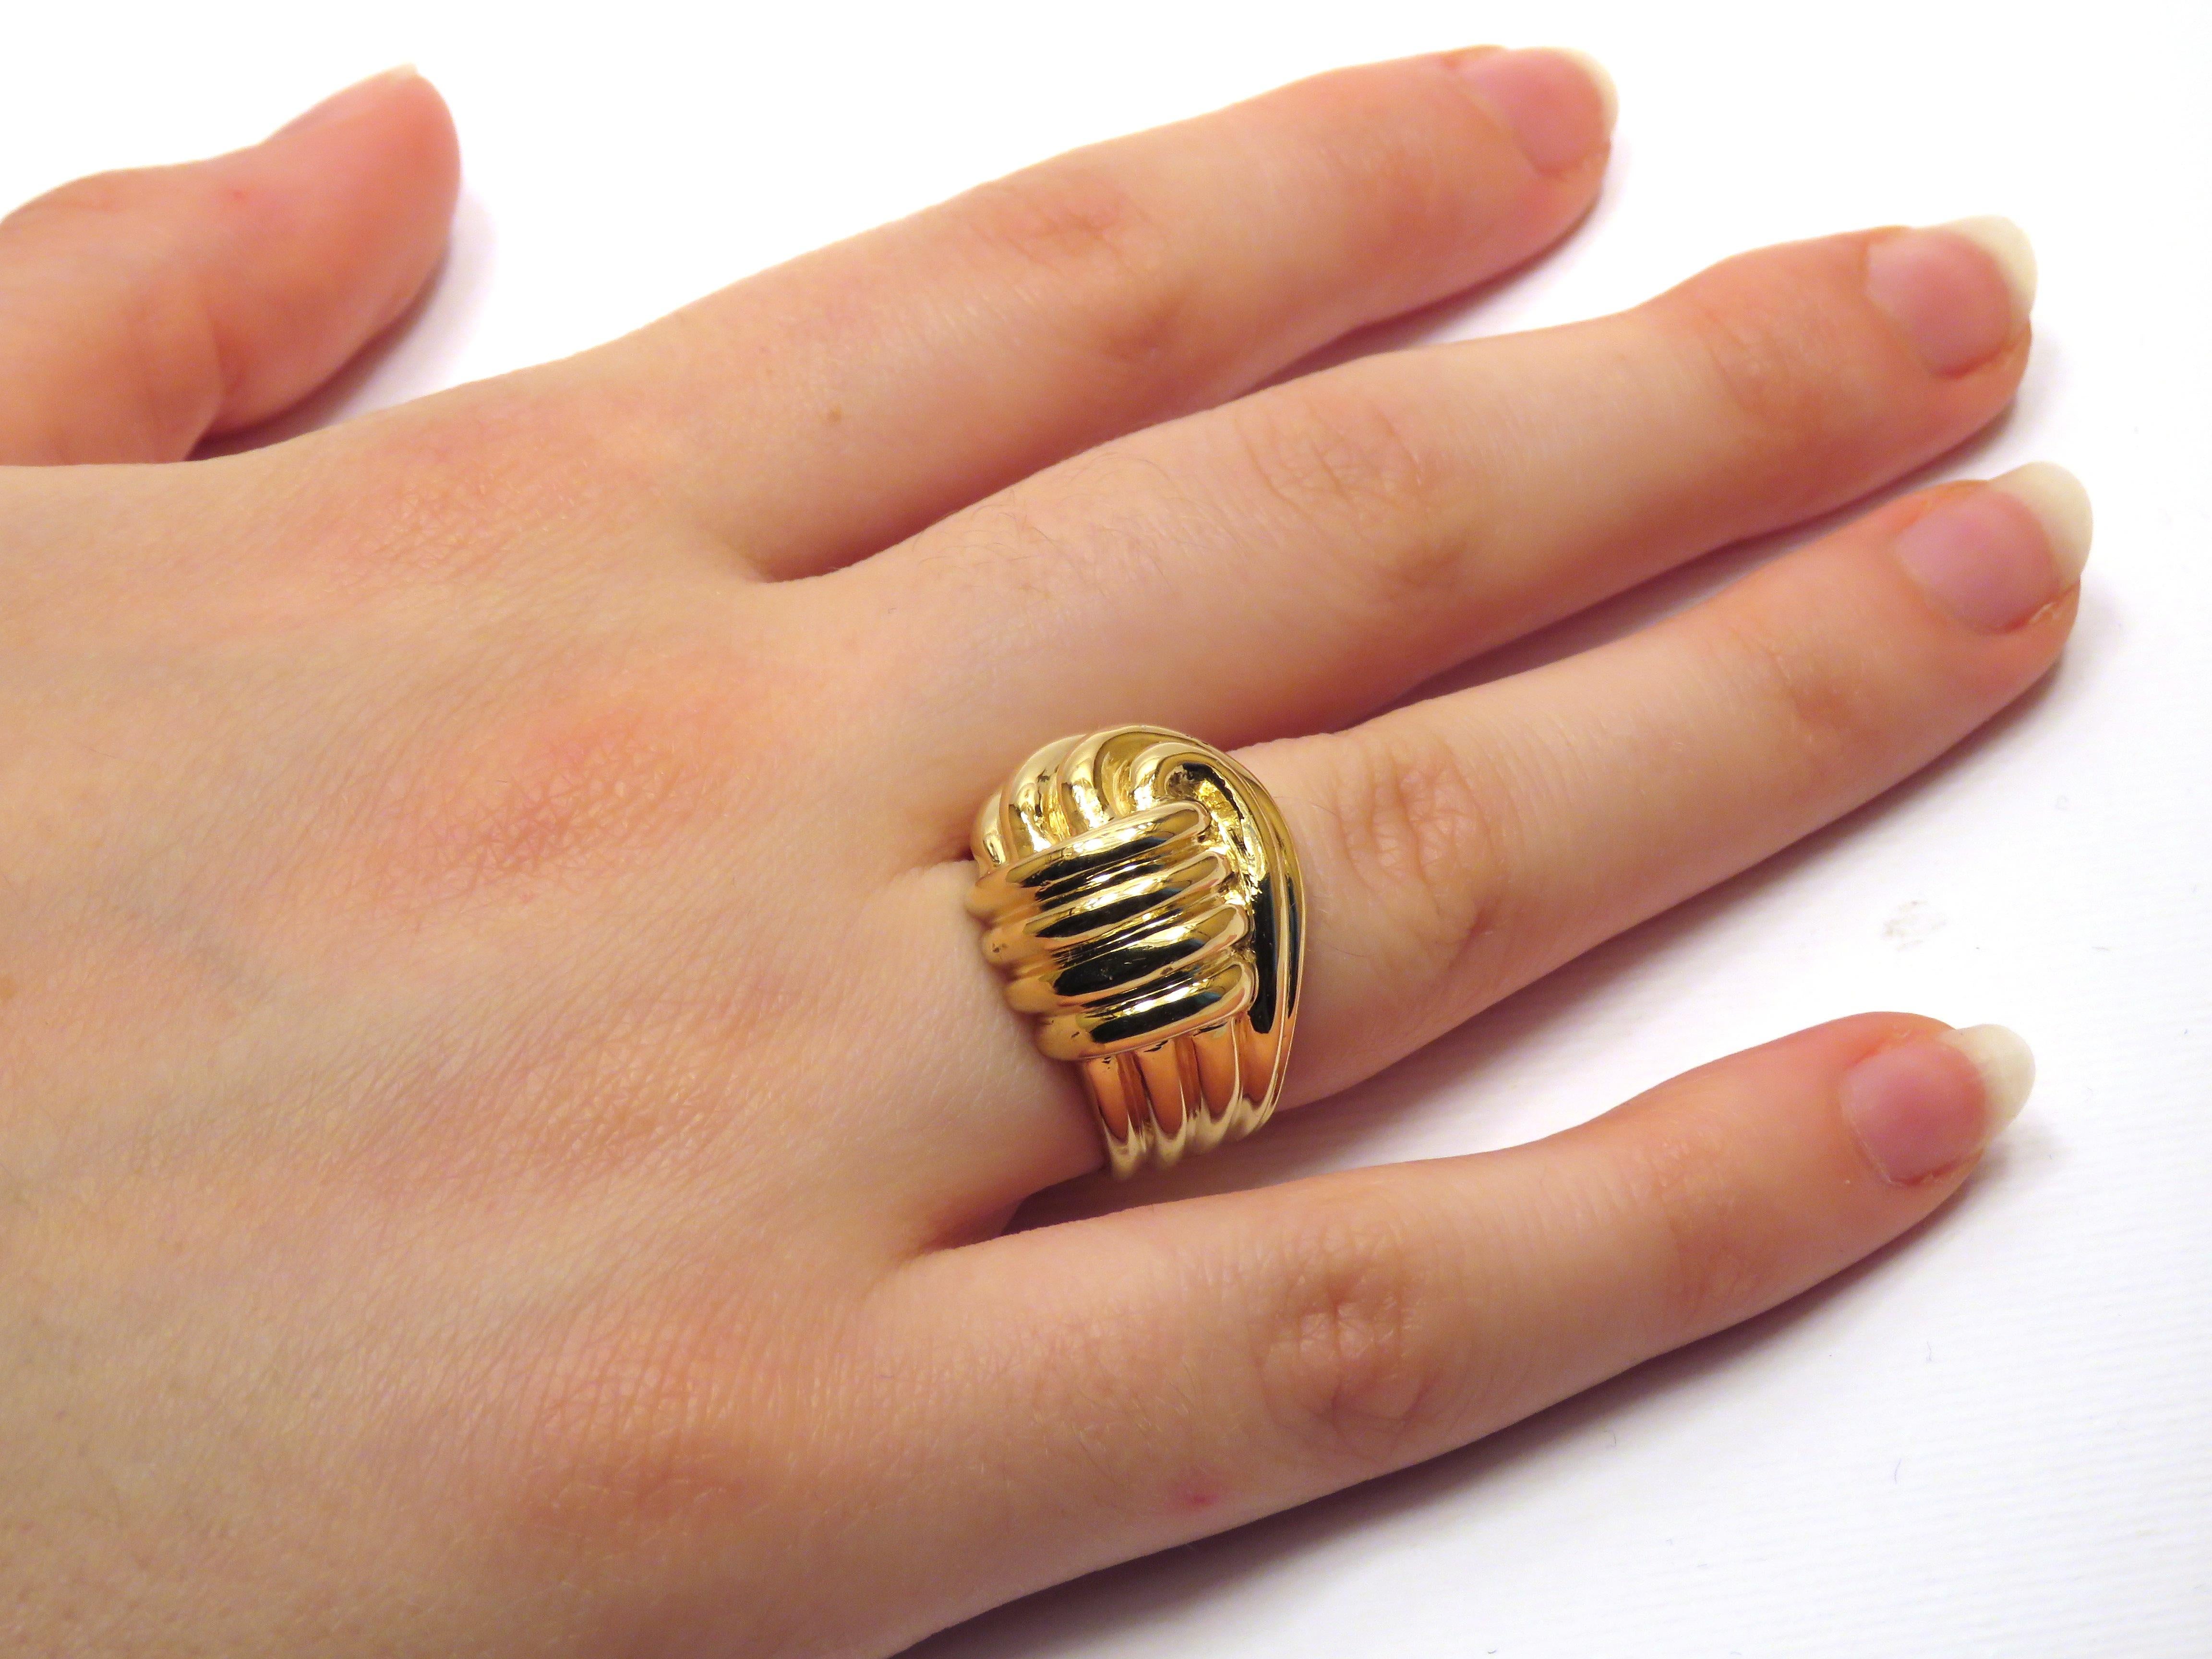 Vintage knot ring in solid 18k yellow gold.
Us finger size: 6 / Italian: 13 / French: 53 / Adjustable to the customer's size before shipping. 

Handcrafted in: 18 karat yellow gold.
Total weight of the ring: 17 grams.
US finger size: